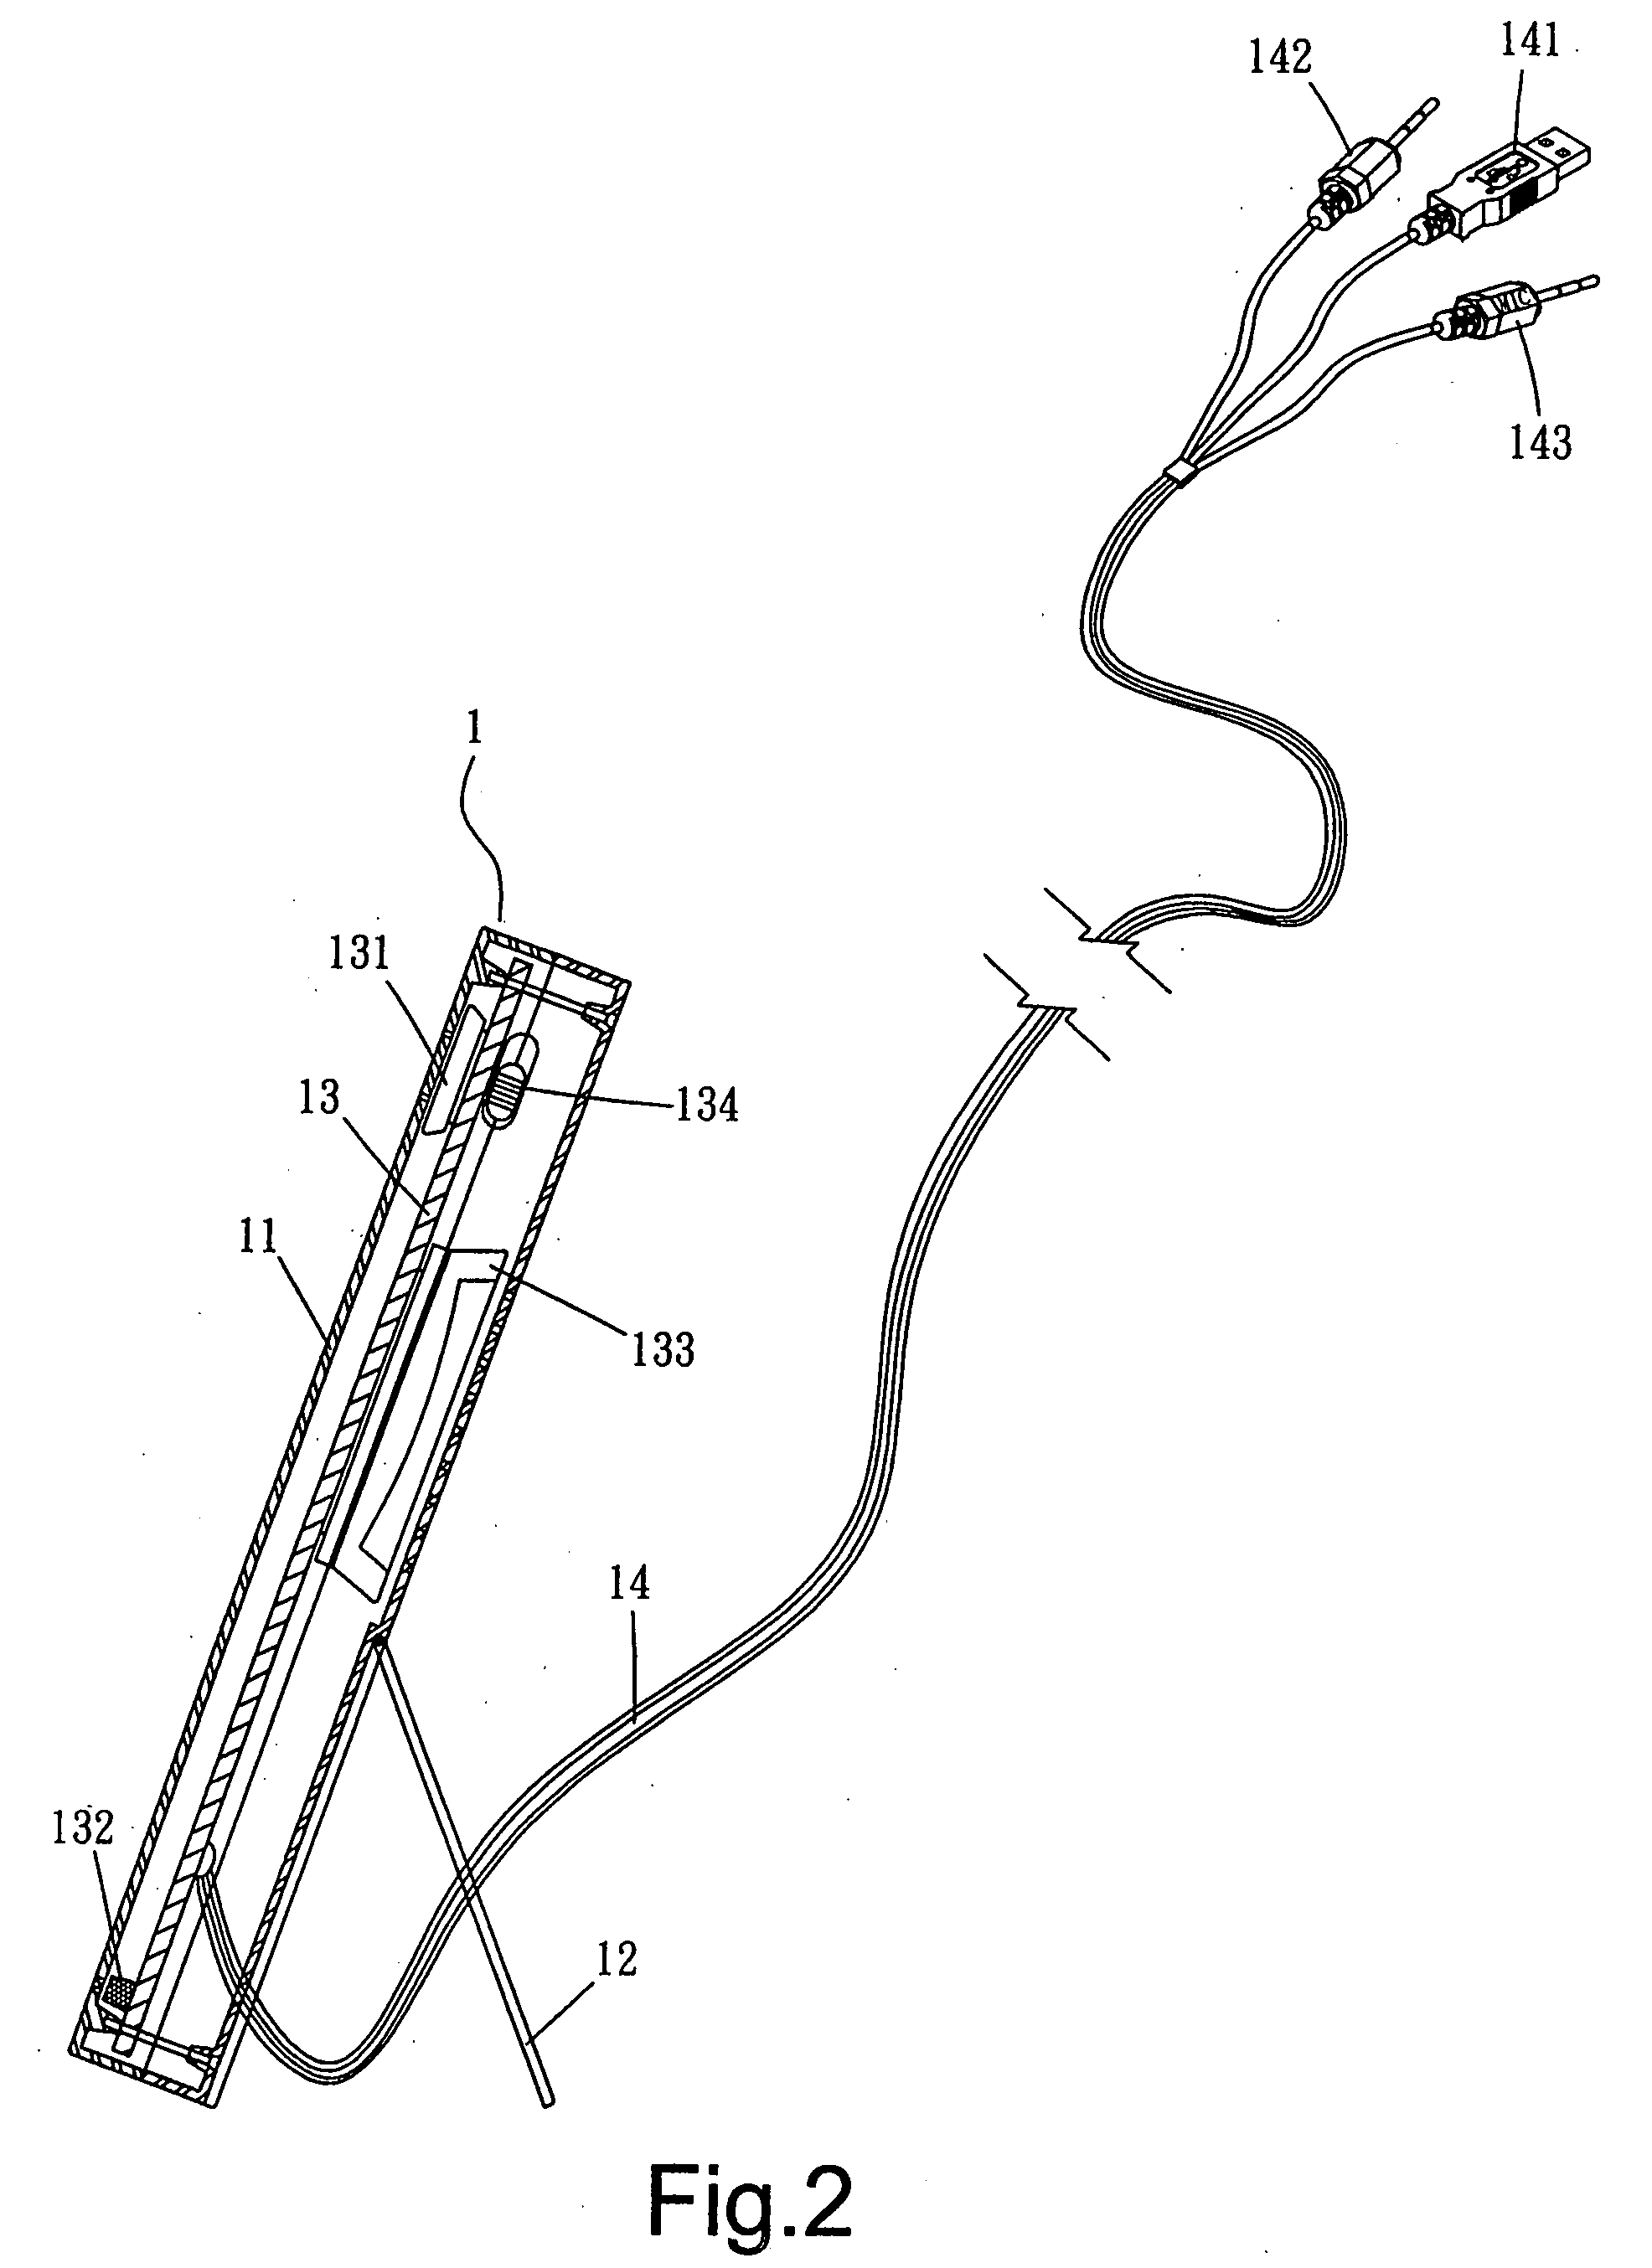 Apparatus for vocal communication over computer networks